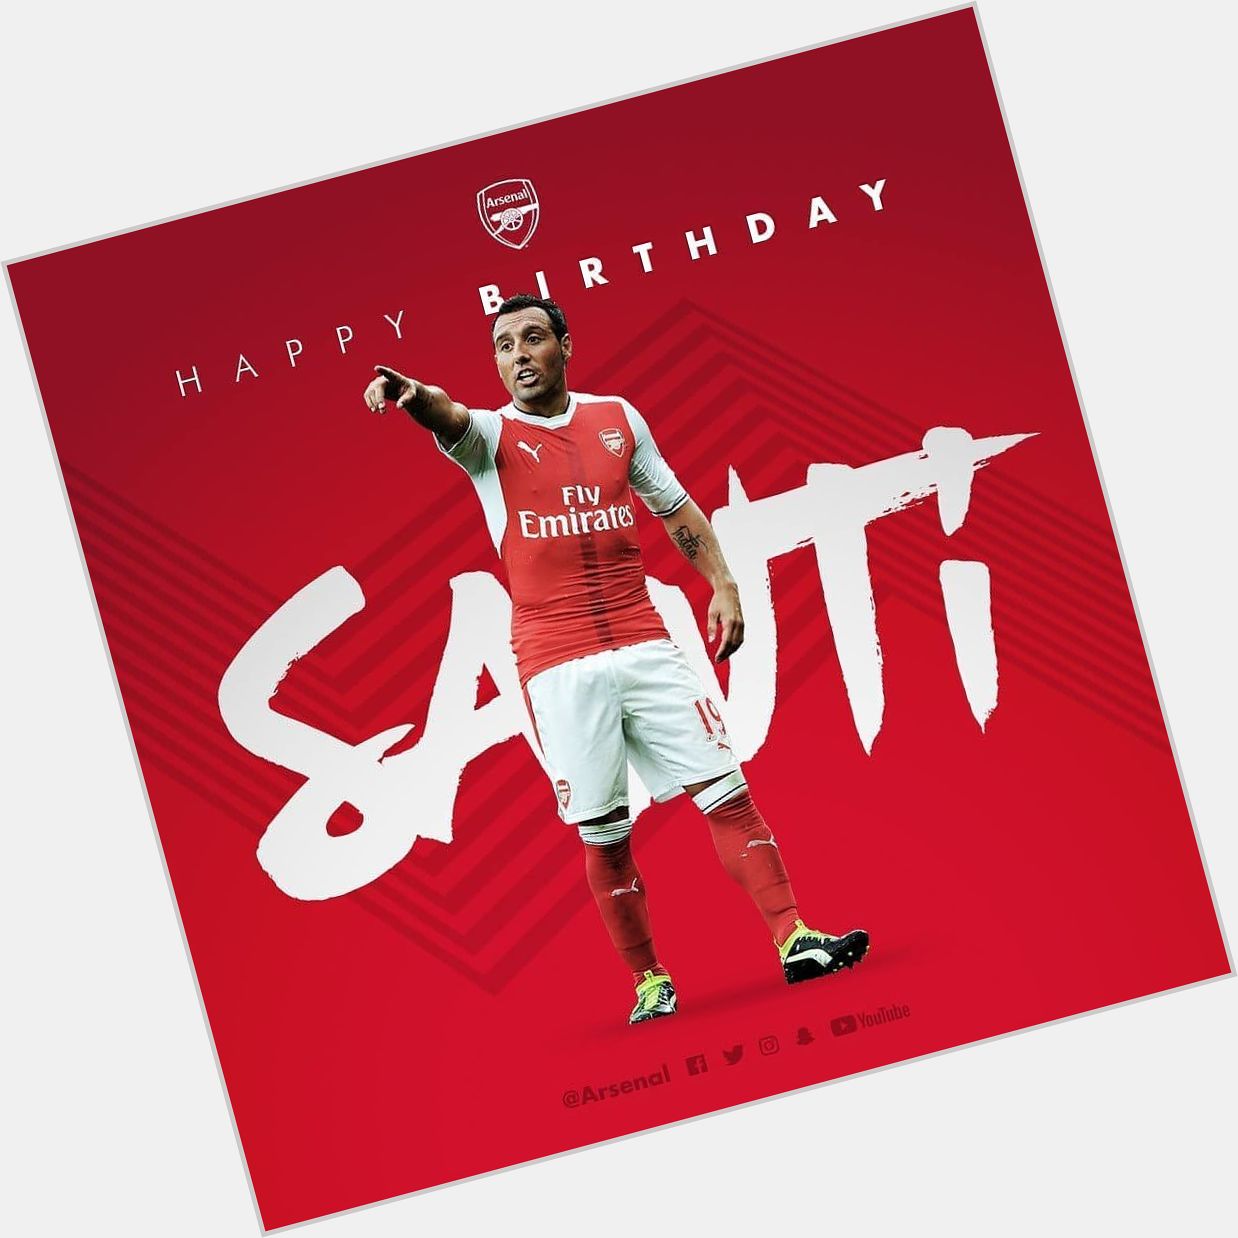 Happy birthday Santi Cazorla, lets hope he recovers and gets back to the pitch. -AUS  